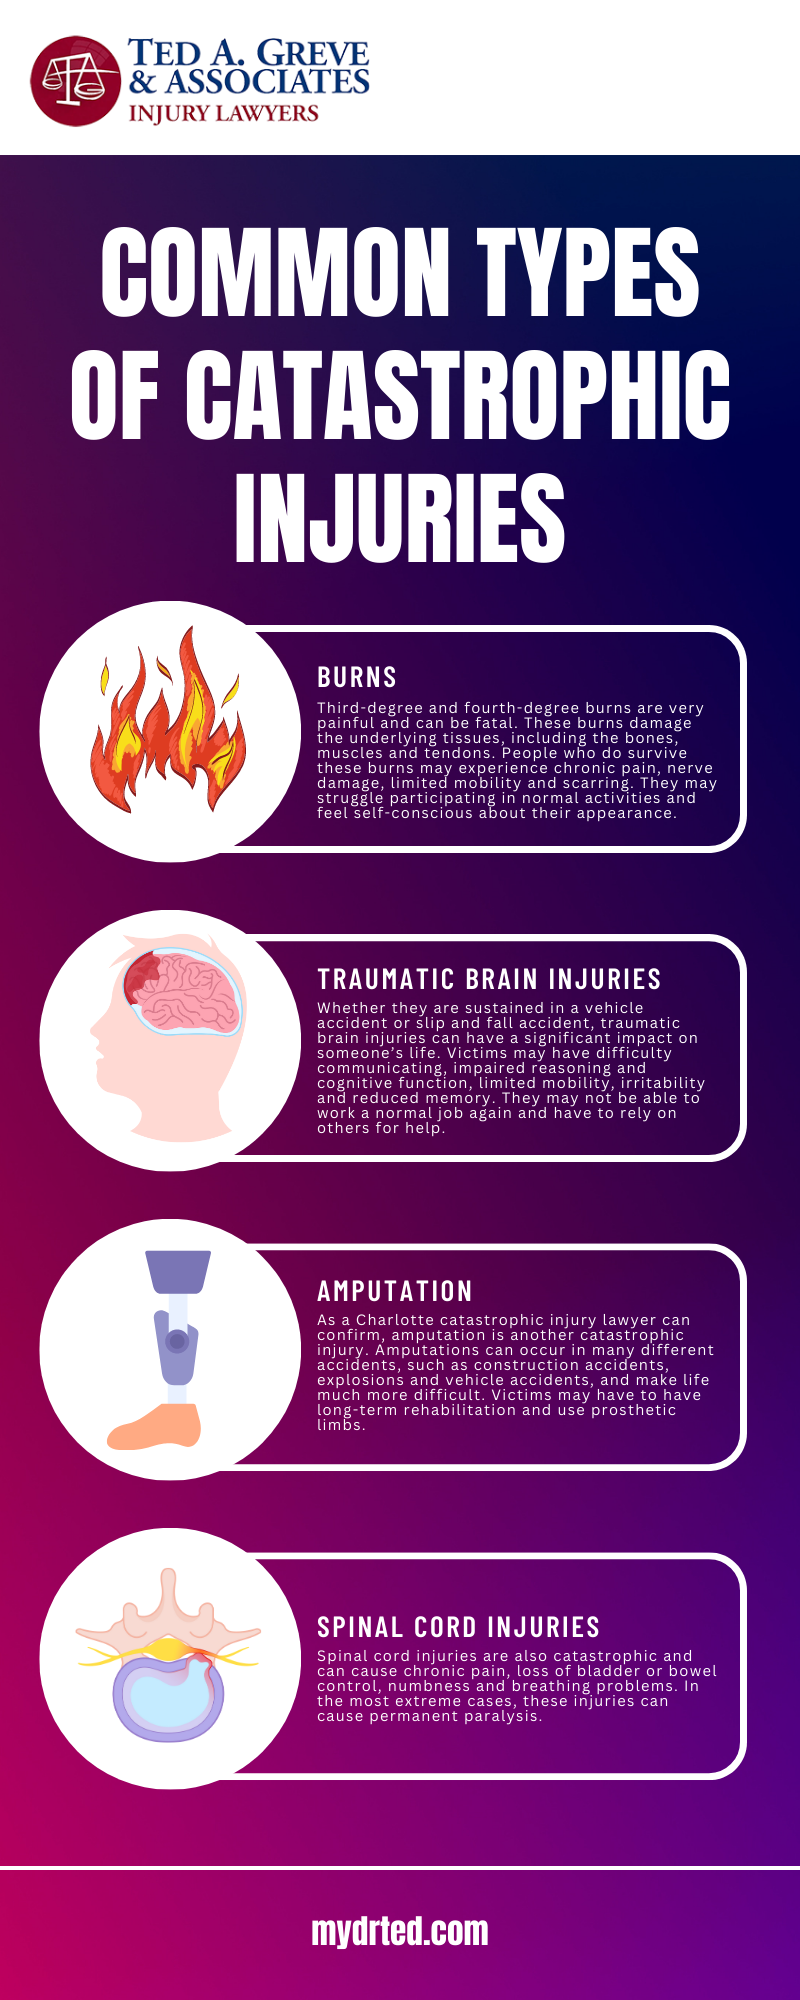 COMMON TYPES OF CATASROPHIC INJURIES